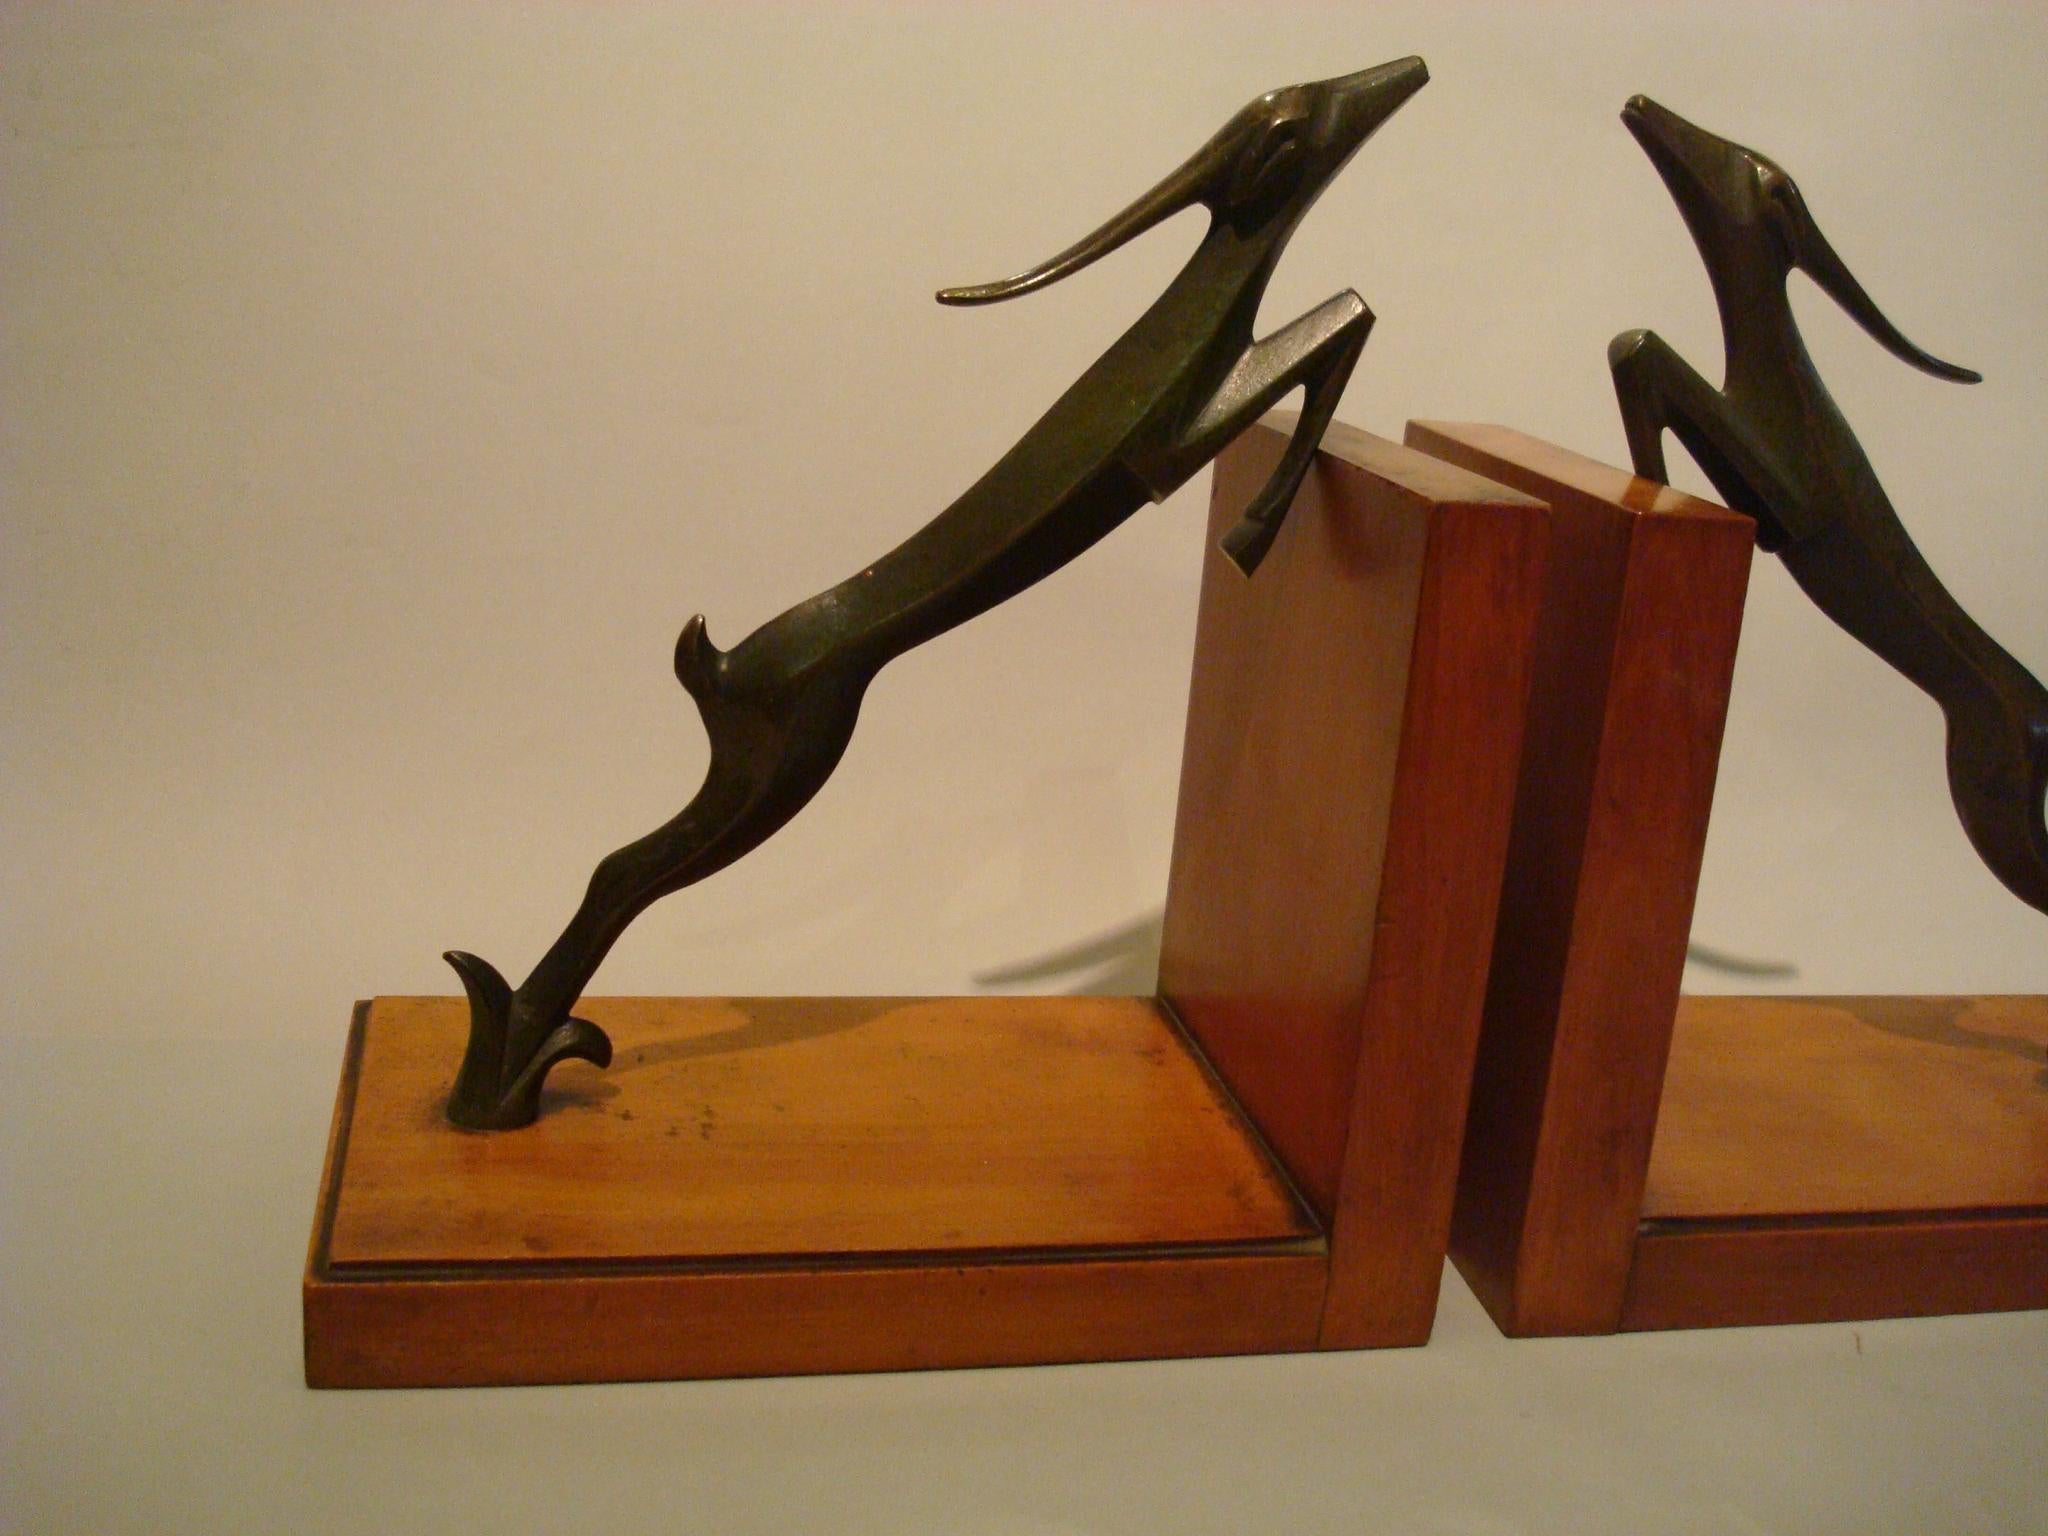 French Art Deco Bronze Bookends Deer Sculpture with Wooden Base, circa 1920s For Sale